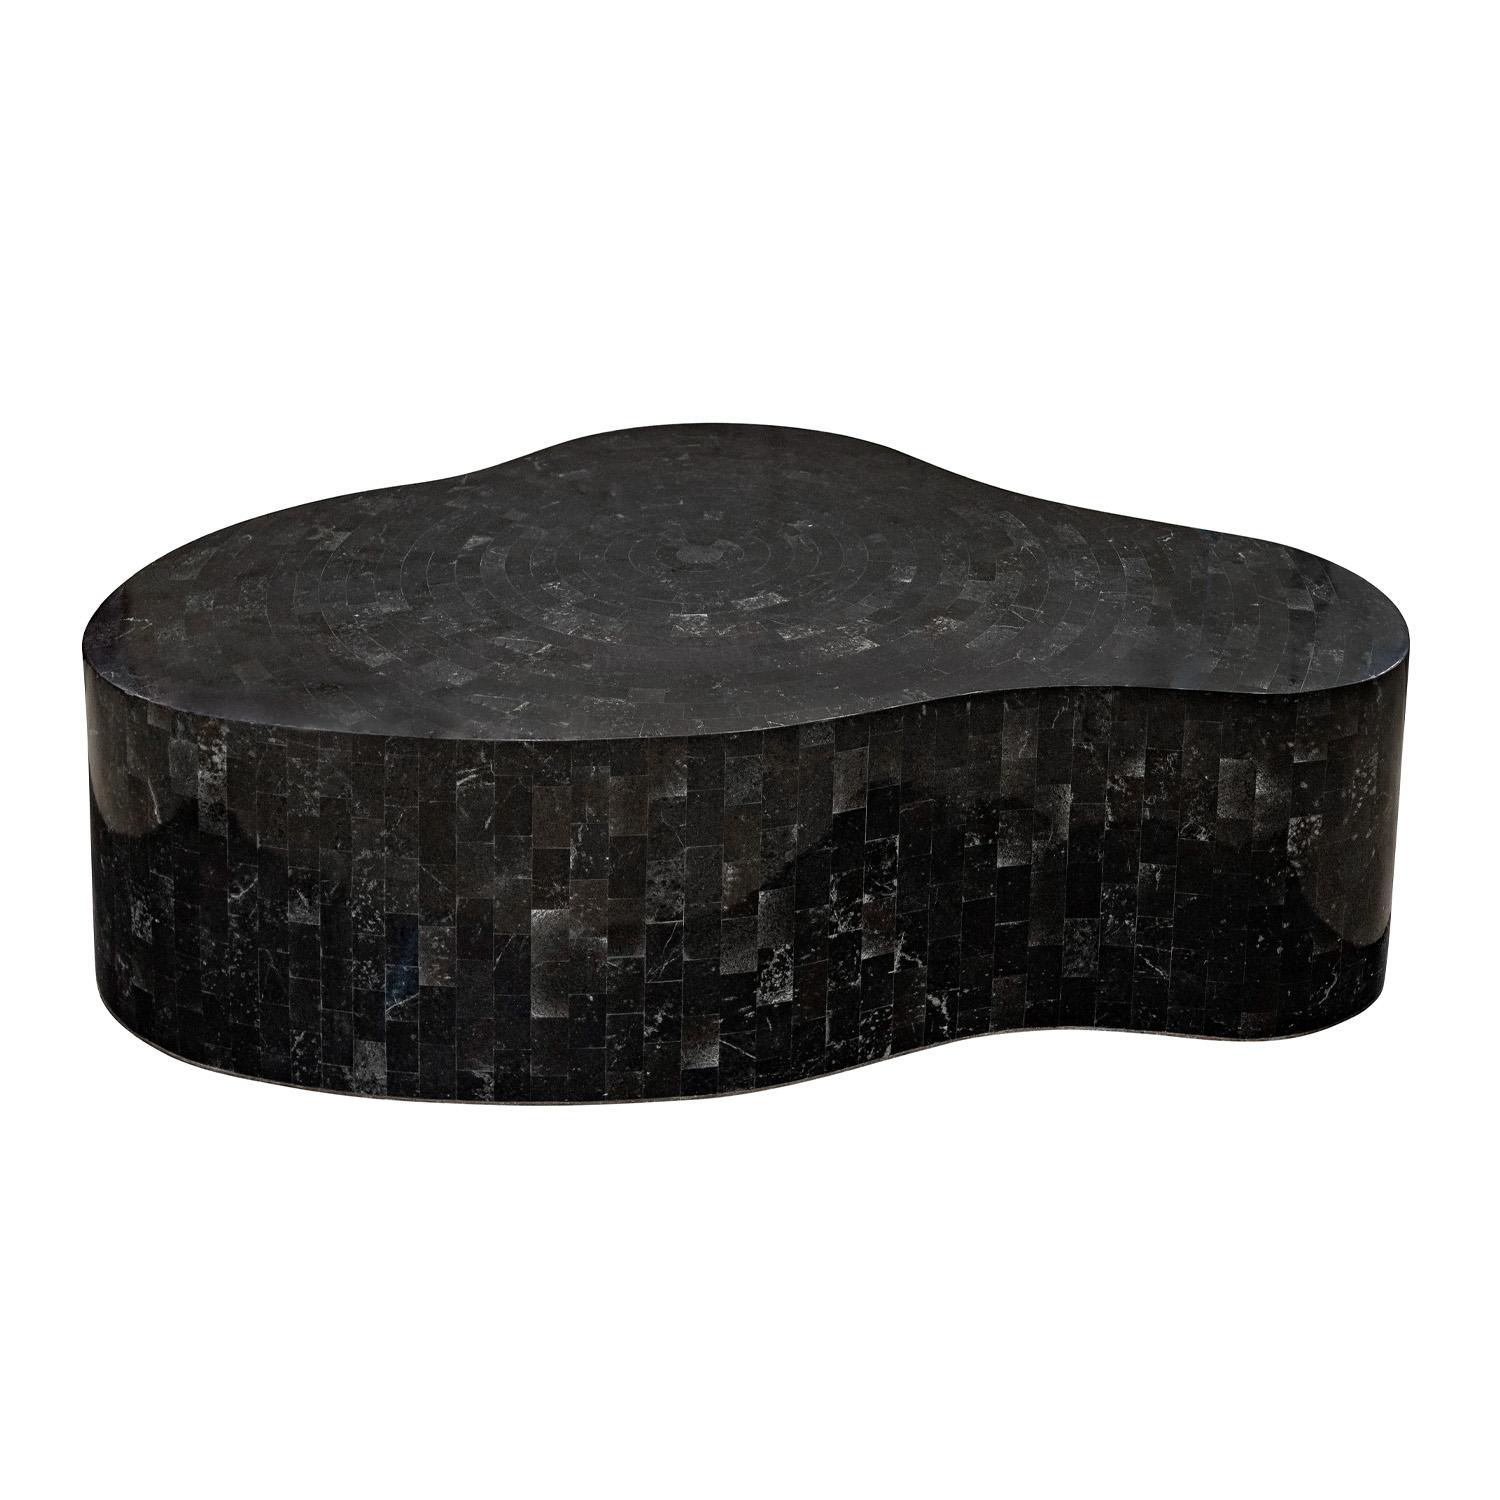 Philippine Karl Springer Freeform Coffee Table in Tessellated Black Marble 1980s 'Signed'